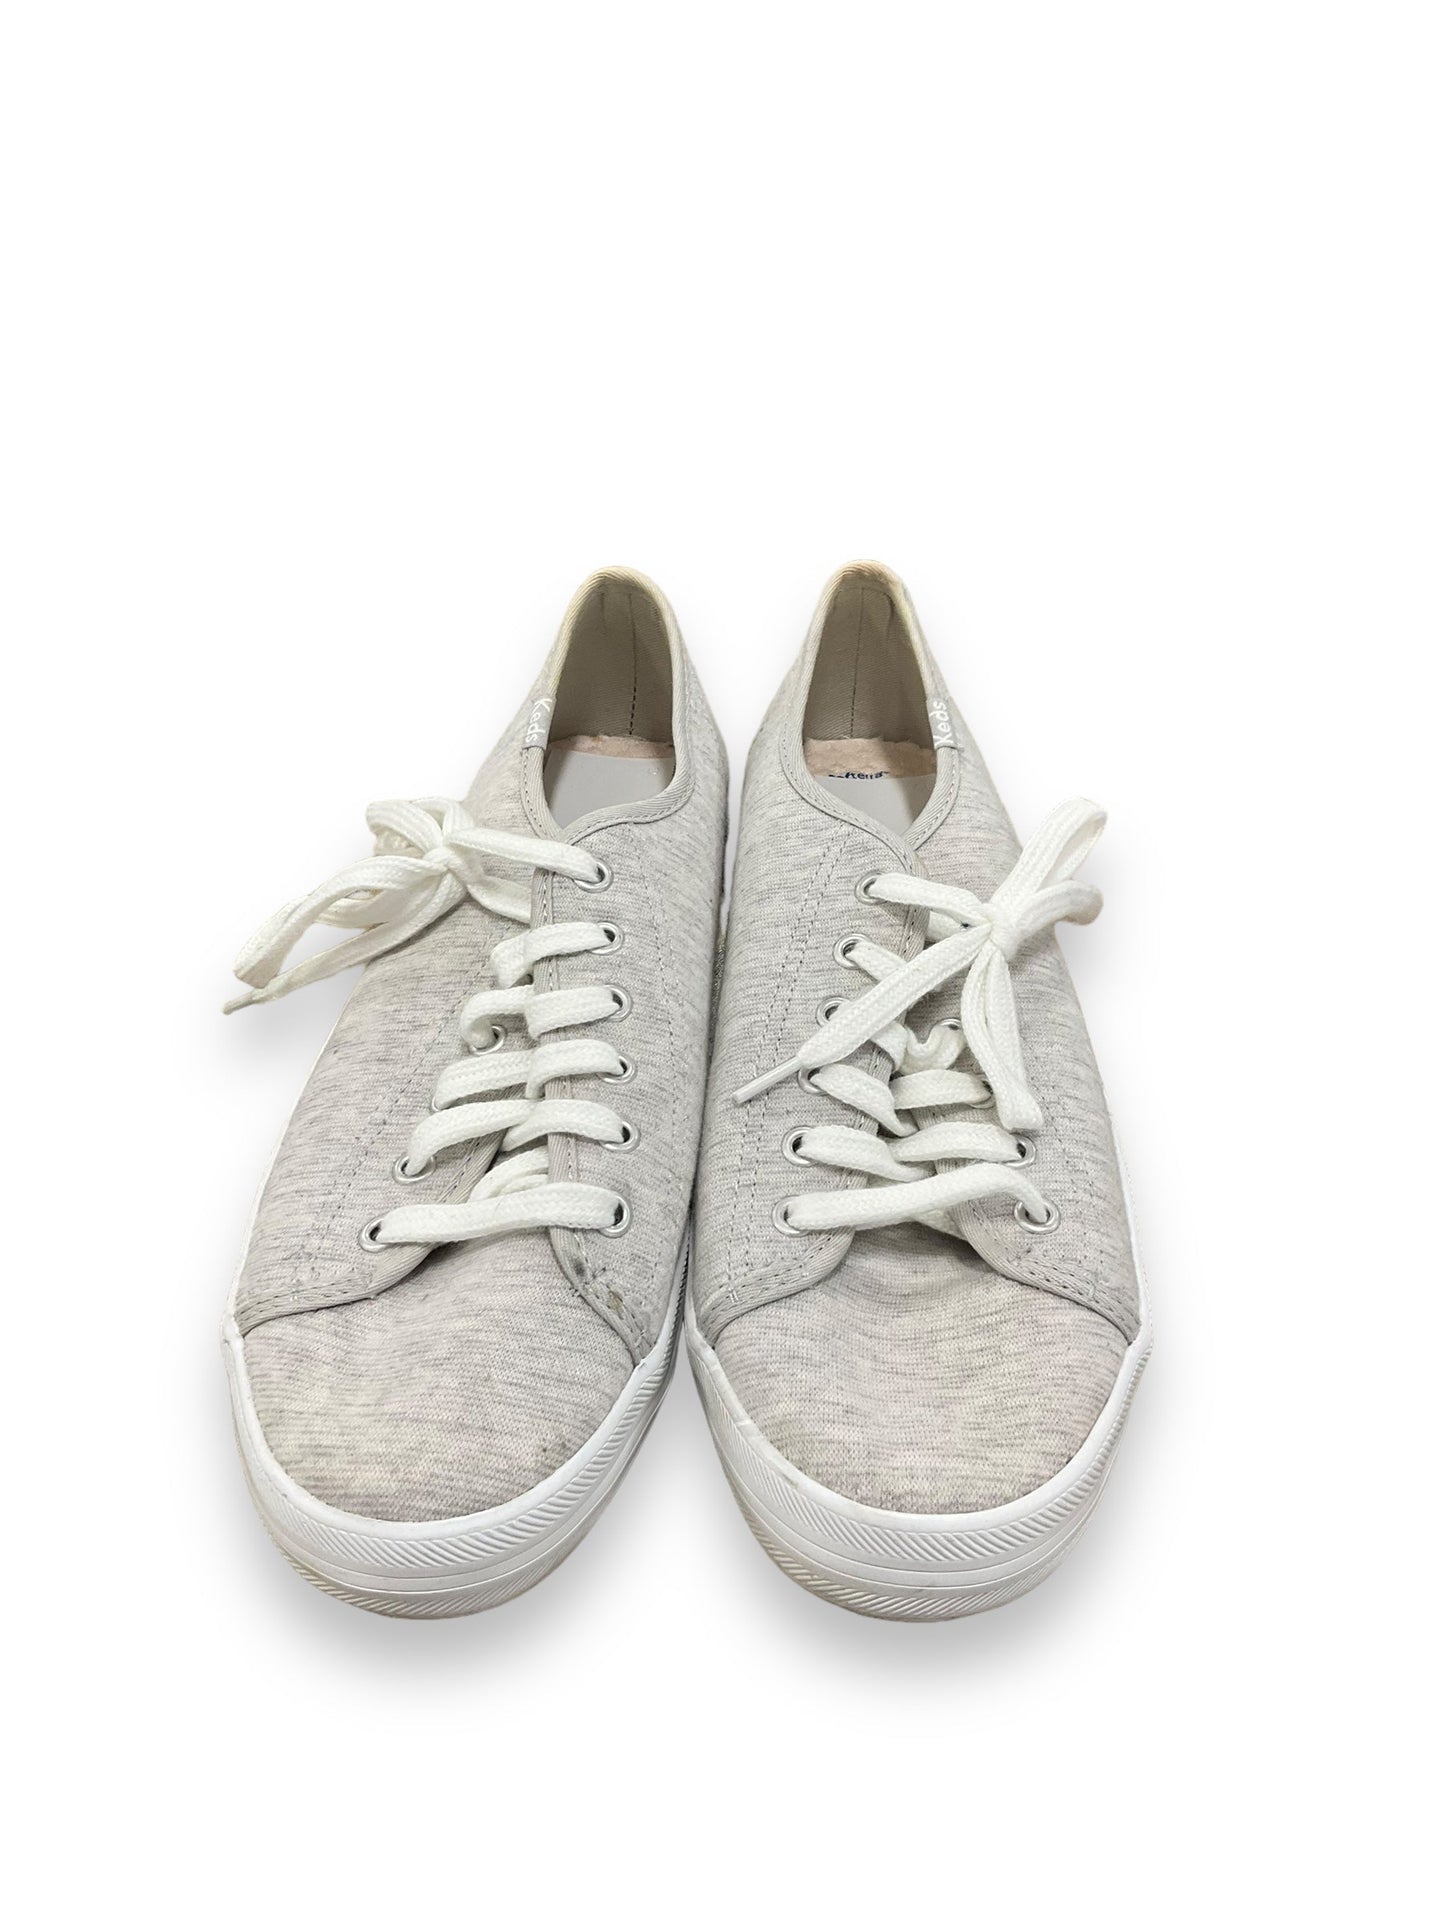 Grey Shoes Sneakers Keds, Size 8